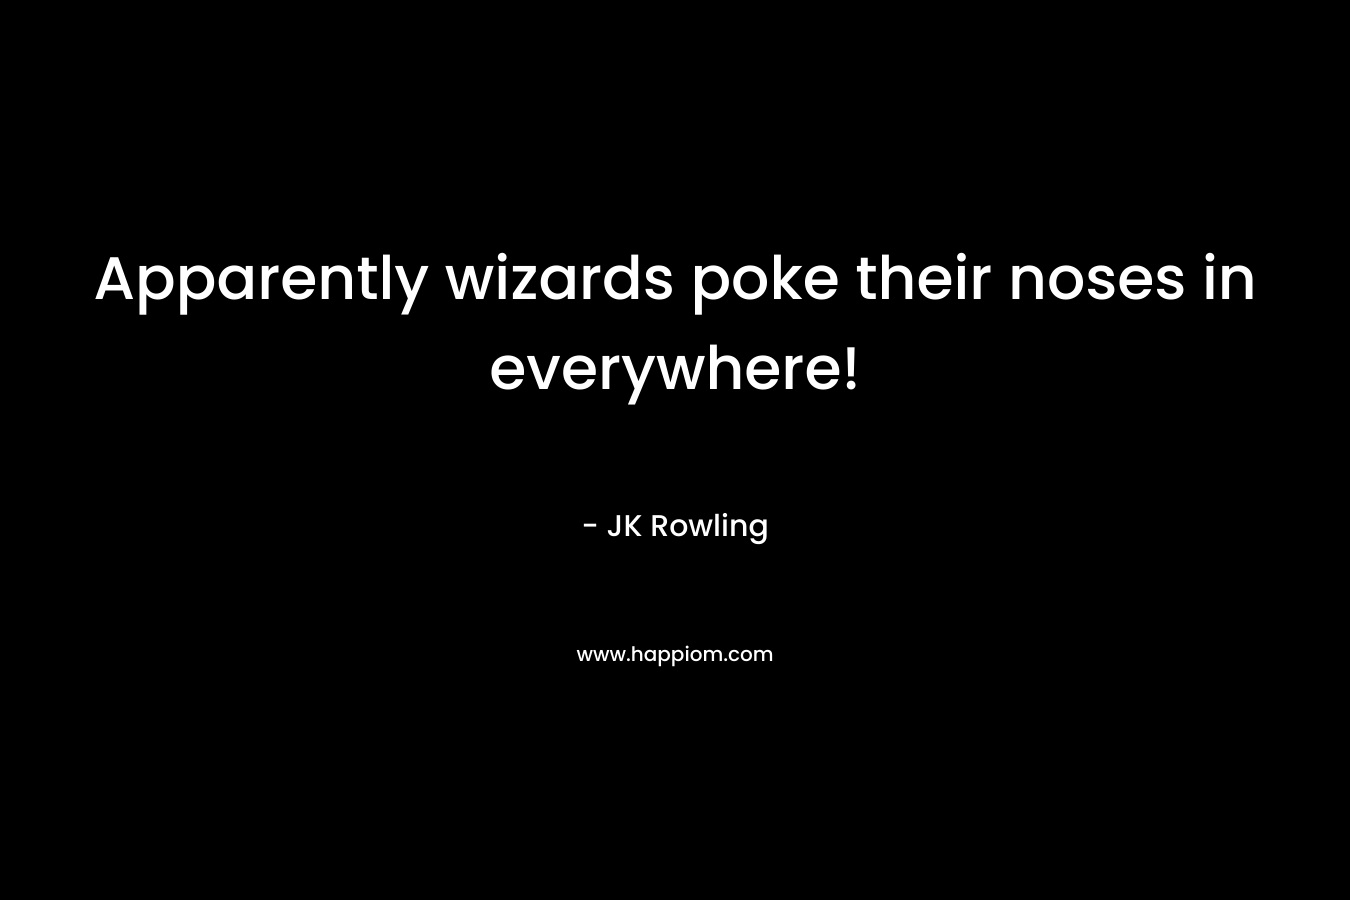 Apparently wizards poke their noses in everywhere! – JK Rowling